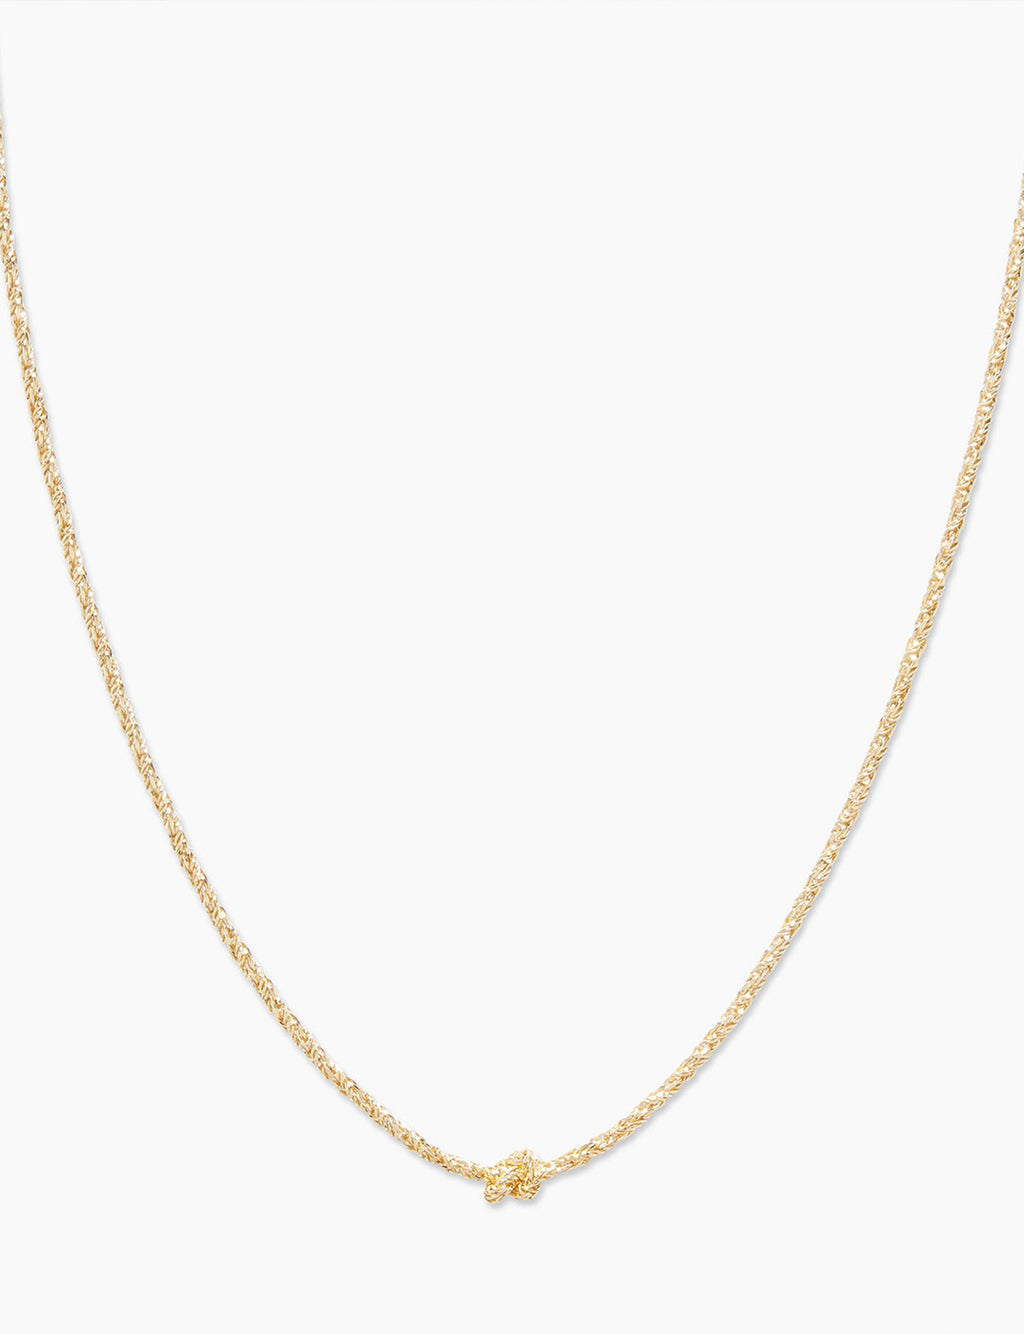 Marin Knot Necklace in Gold